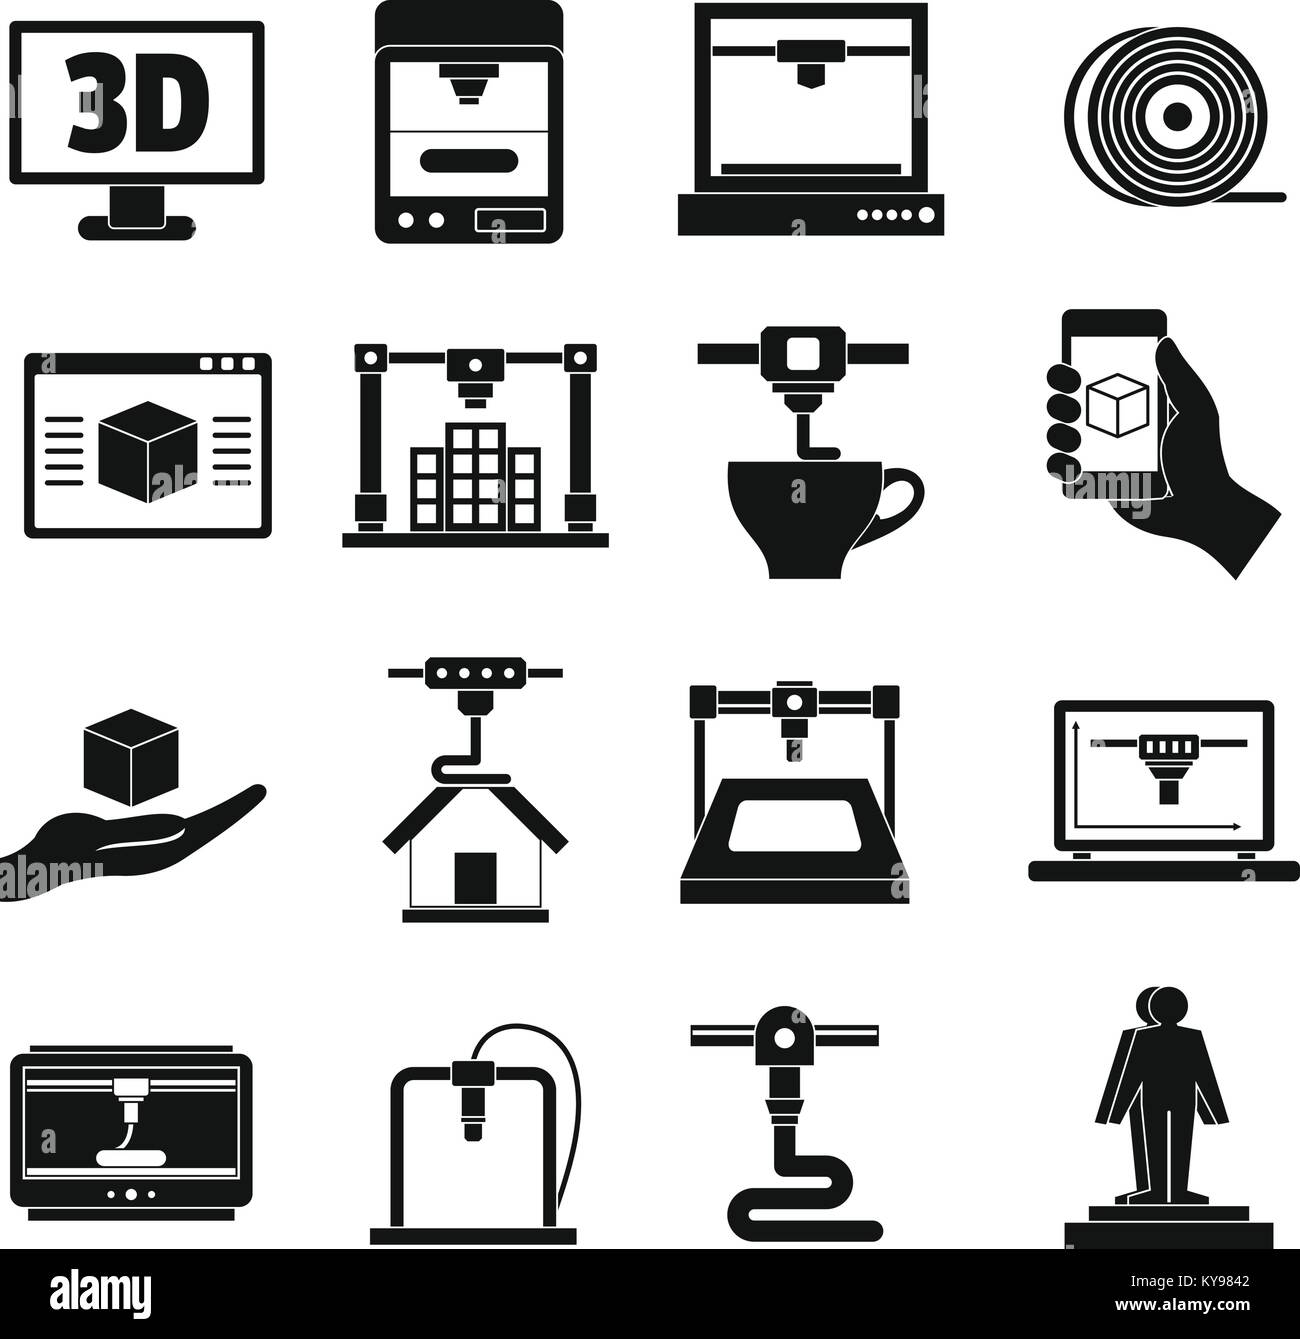 Download 3D Printing icons set. Simple illustration of 16 3d Printing vector Stock Vector Art ...